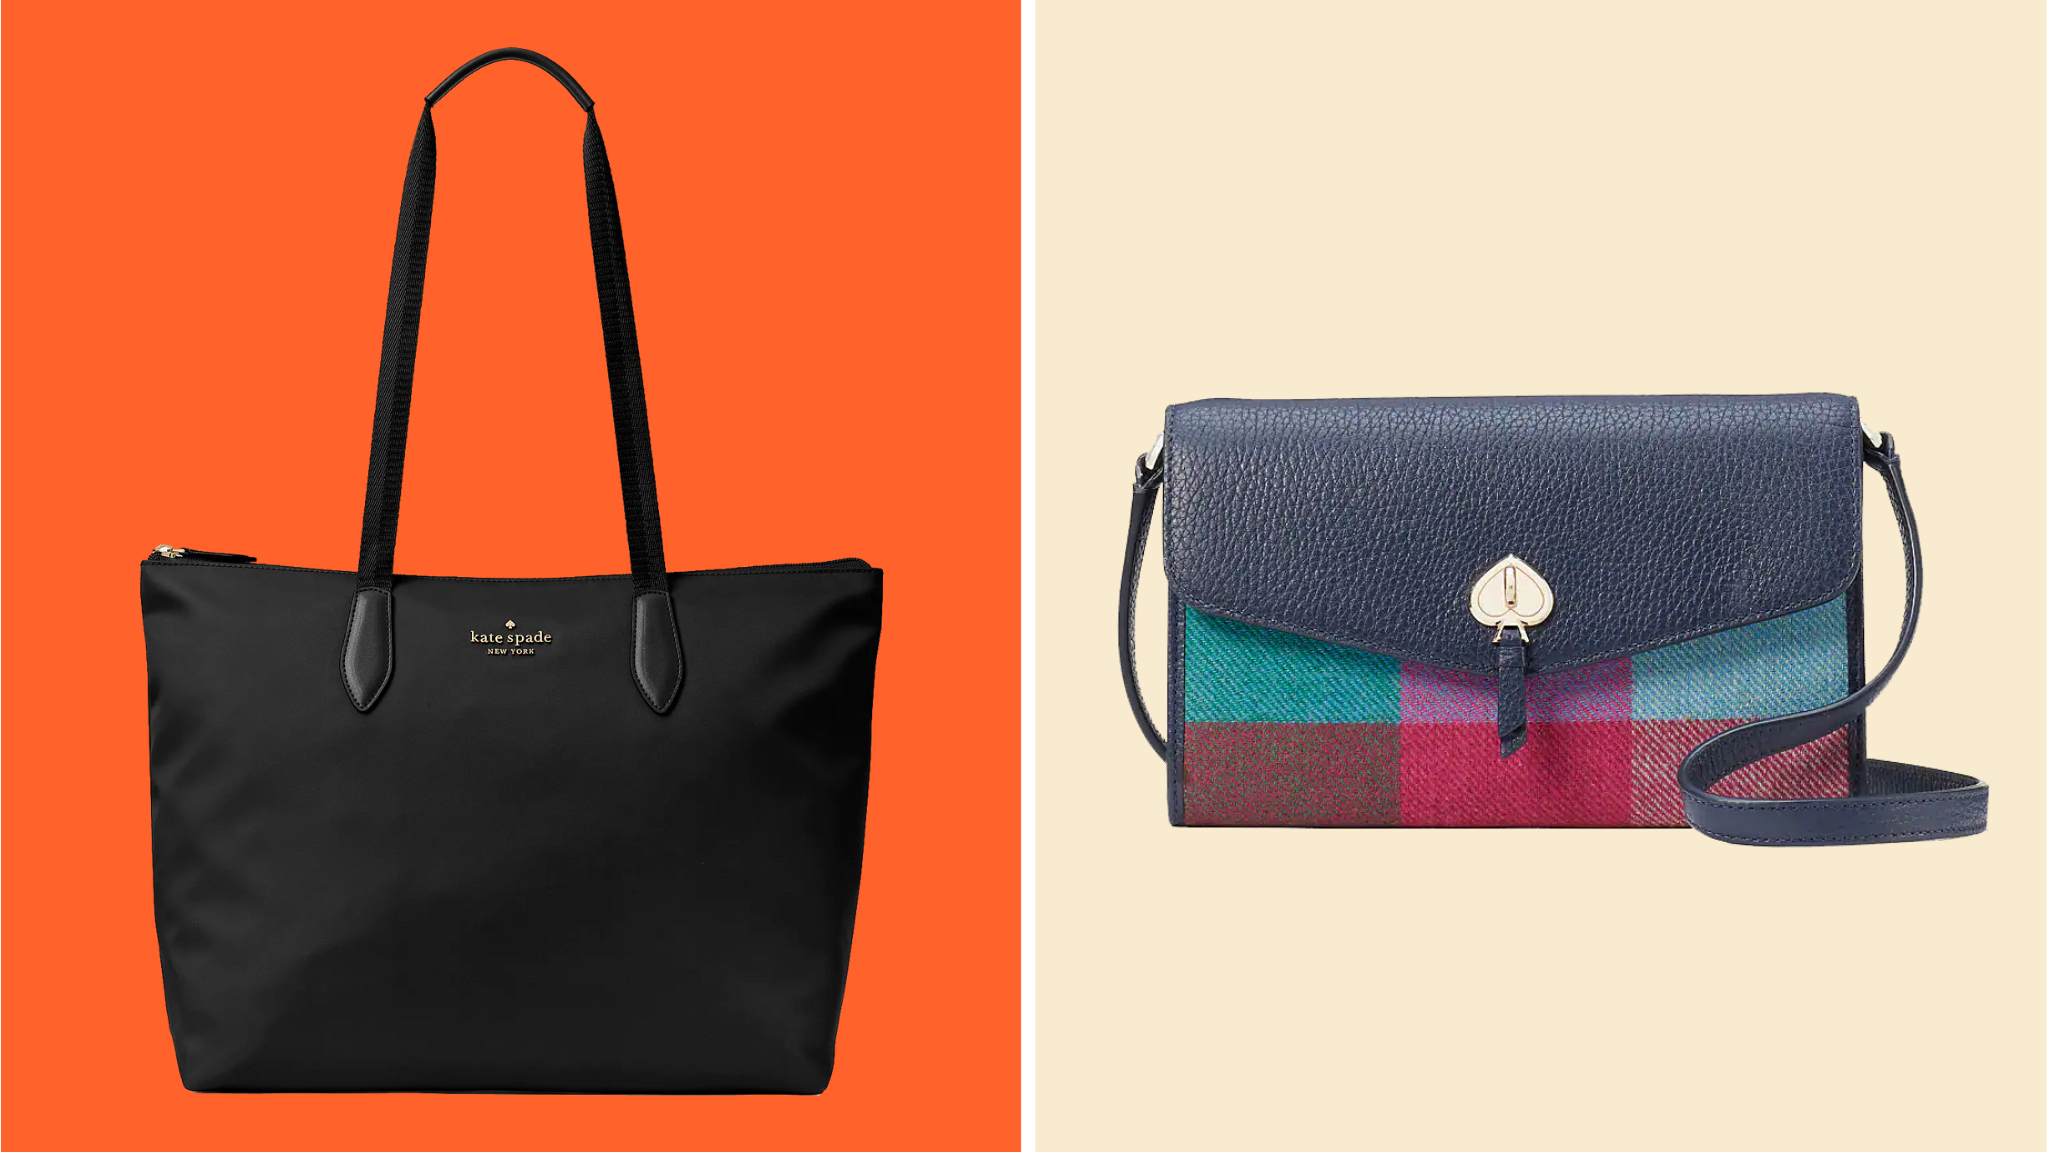 Kate Spade Surprise sale: Up to 75% off stylish purses, totes, wallets